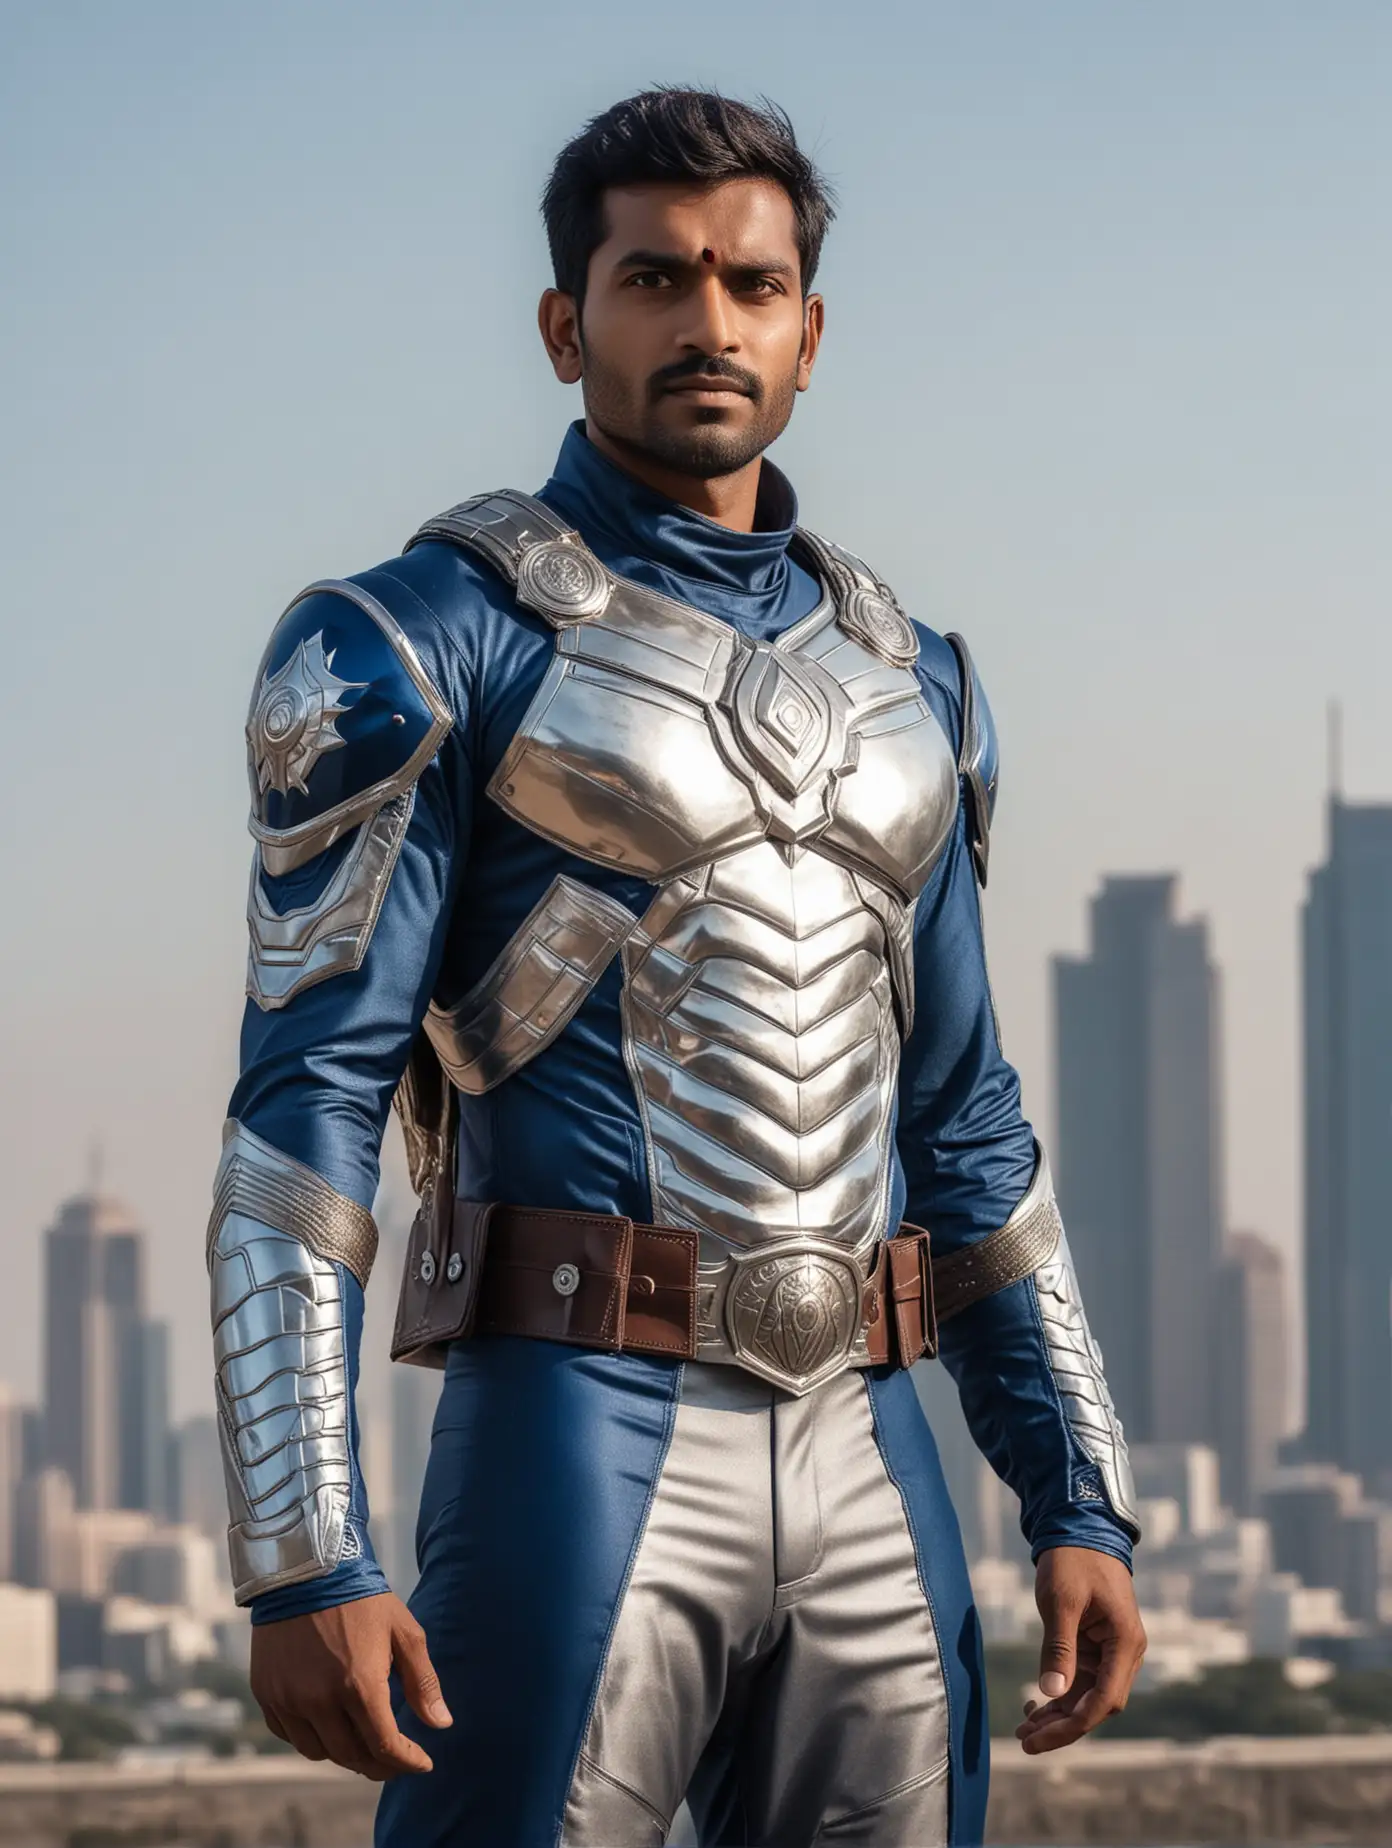 Indian Superhero in Silver and Blue Armor Against Eclipse Skyline